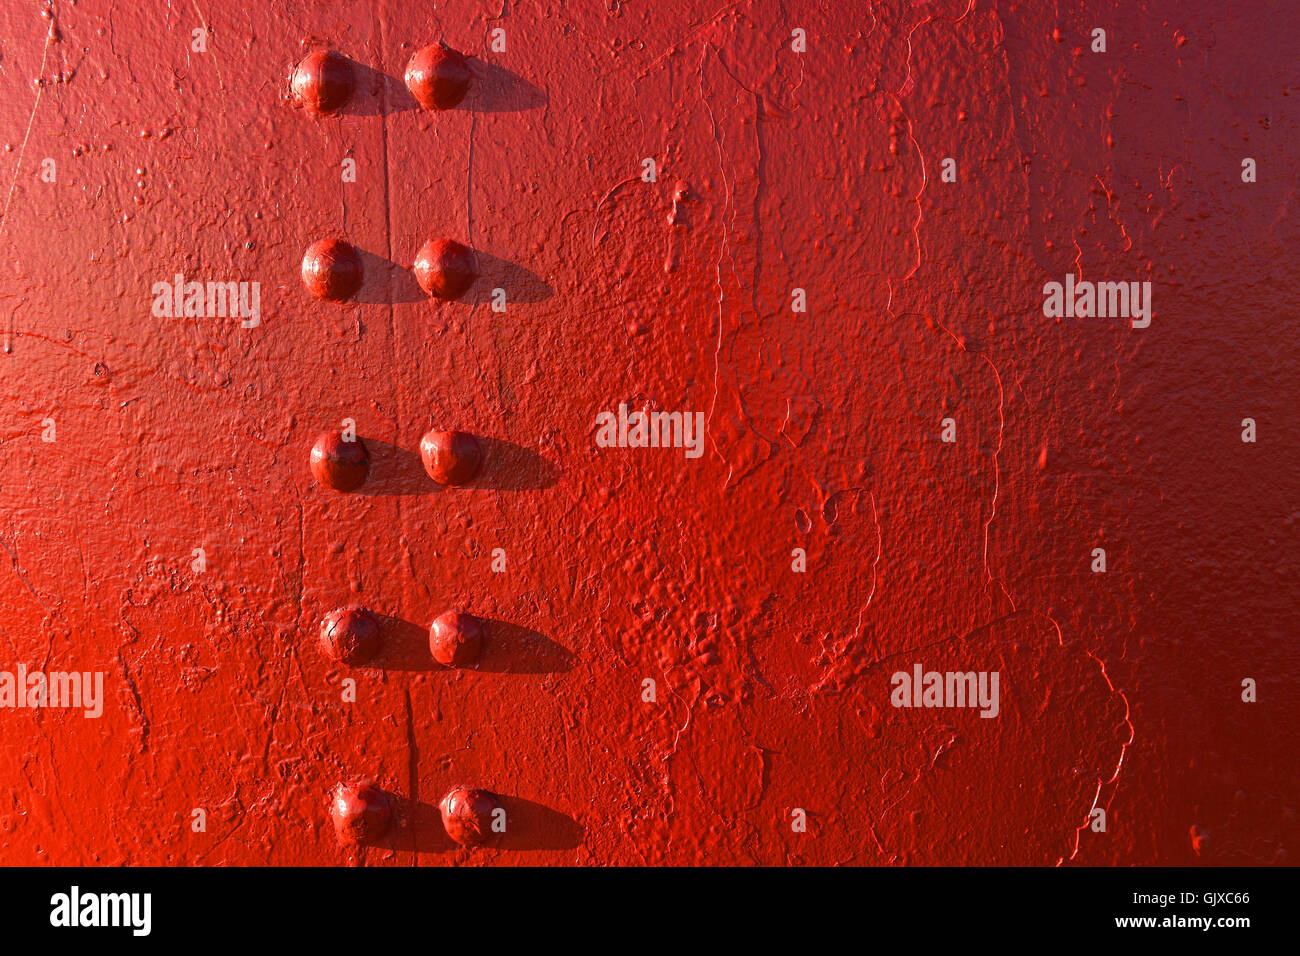 Red painted surface with bolts with light gradient Stock Photo